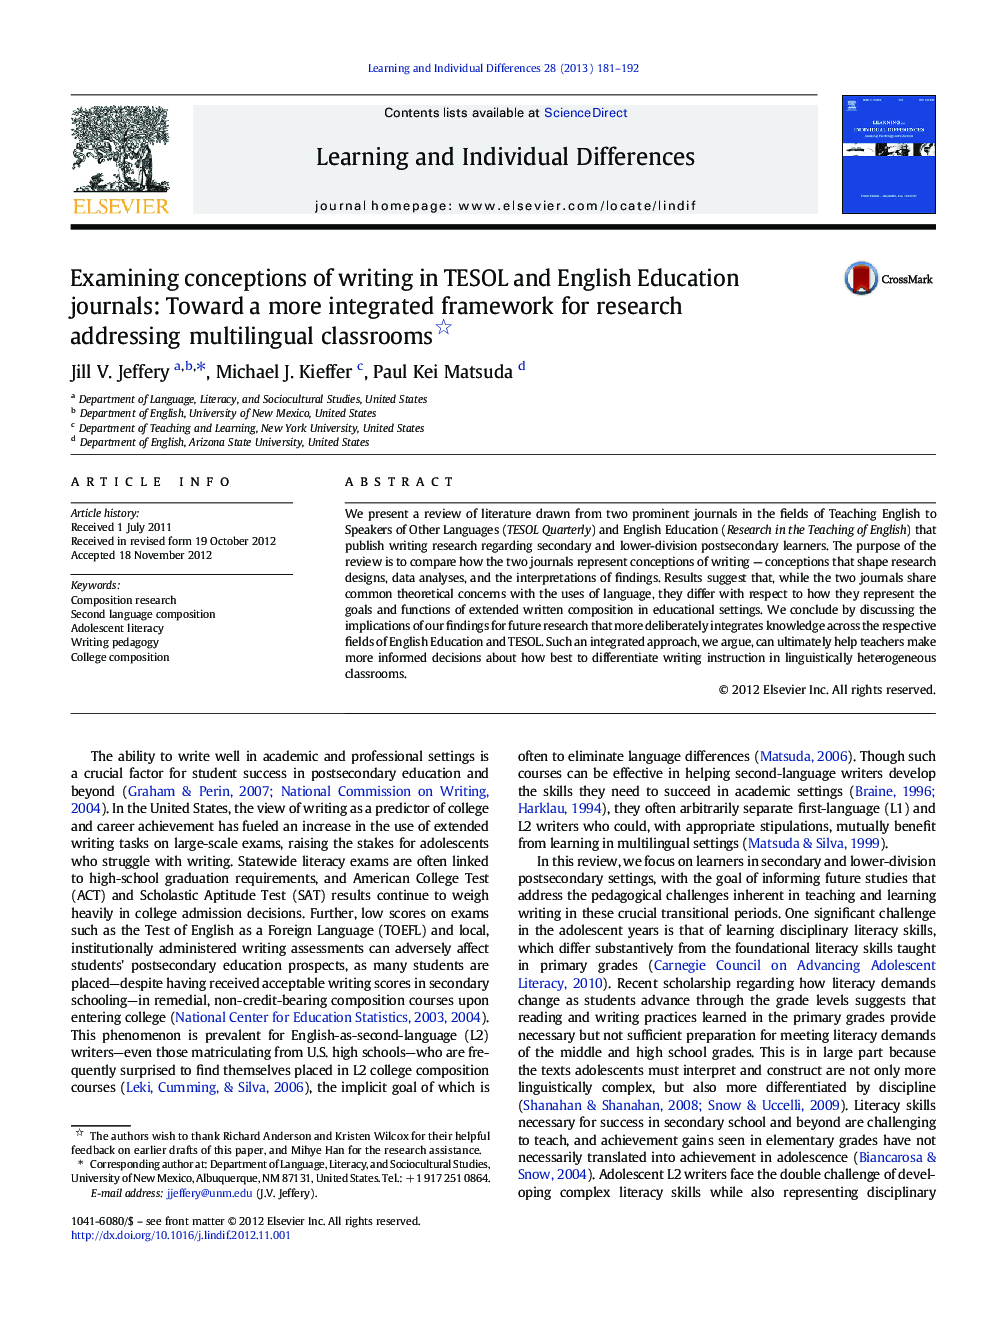 Examining conceptions of writing in TESOL and English Education journals: Toward a more integrated framework for research addressing multilingual classrooms 